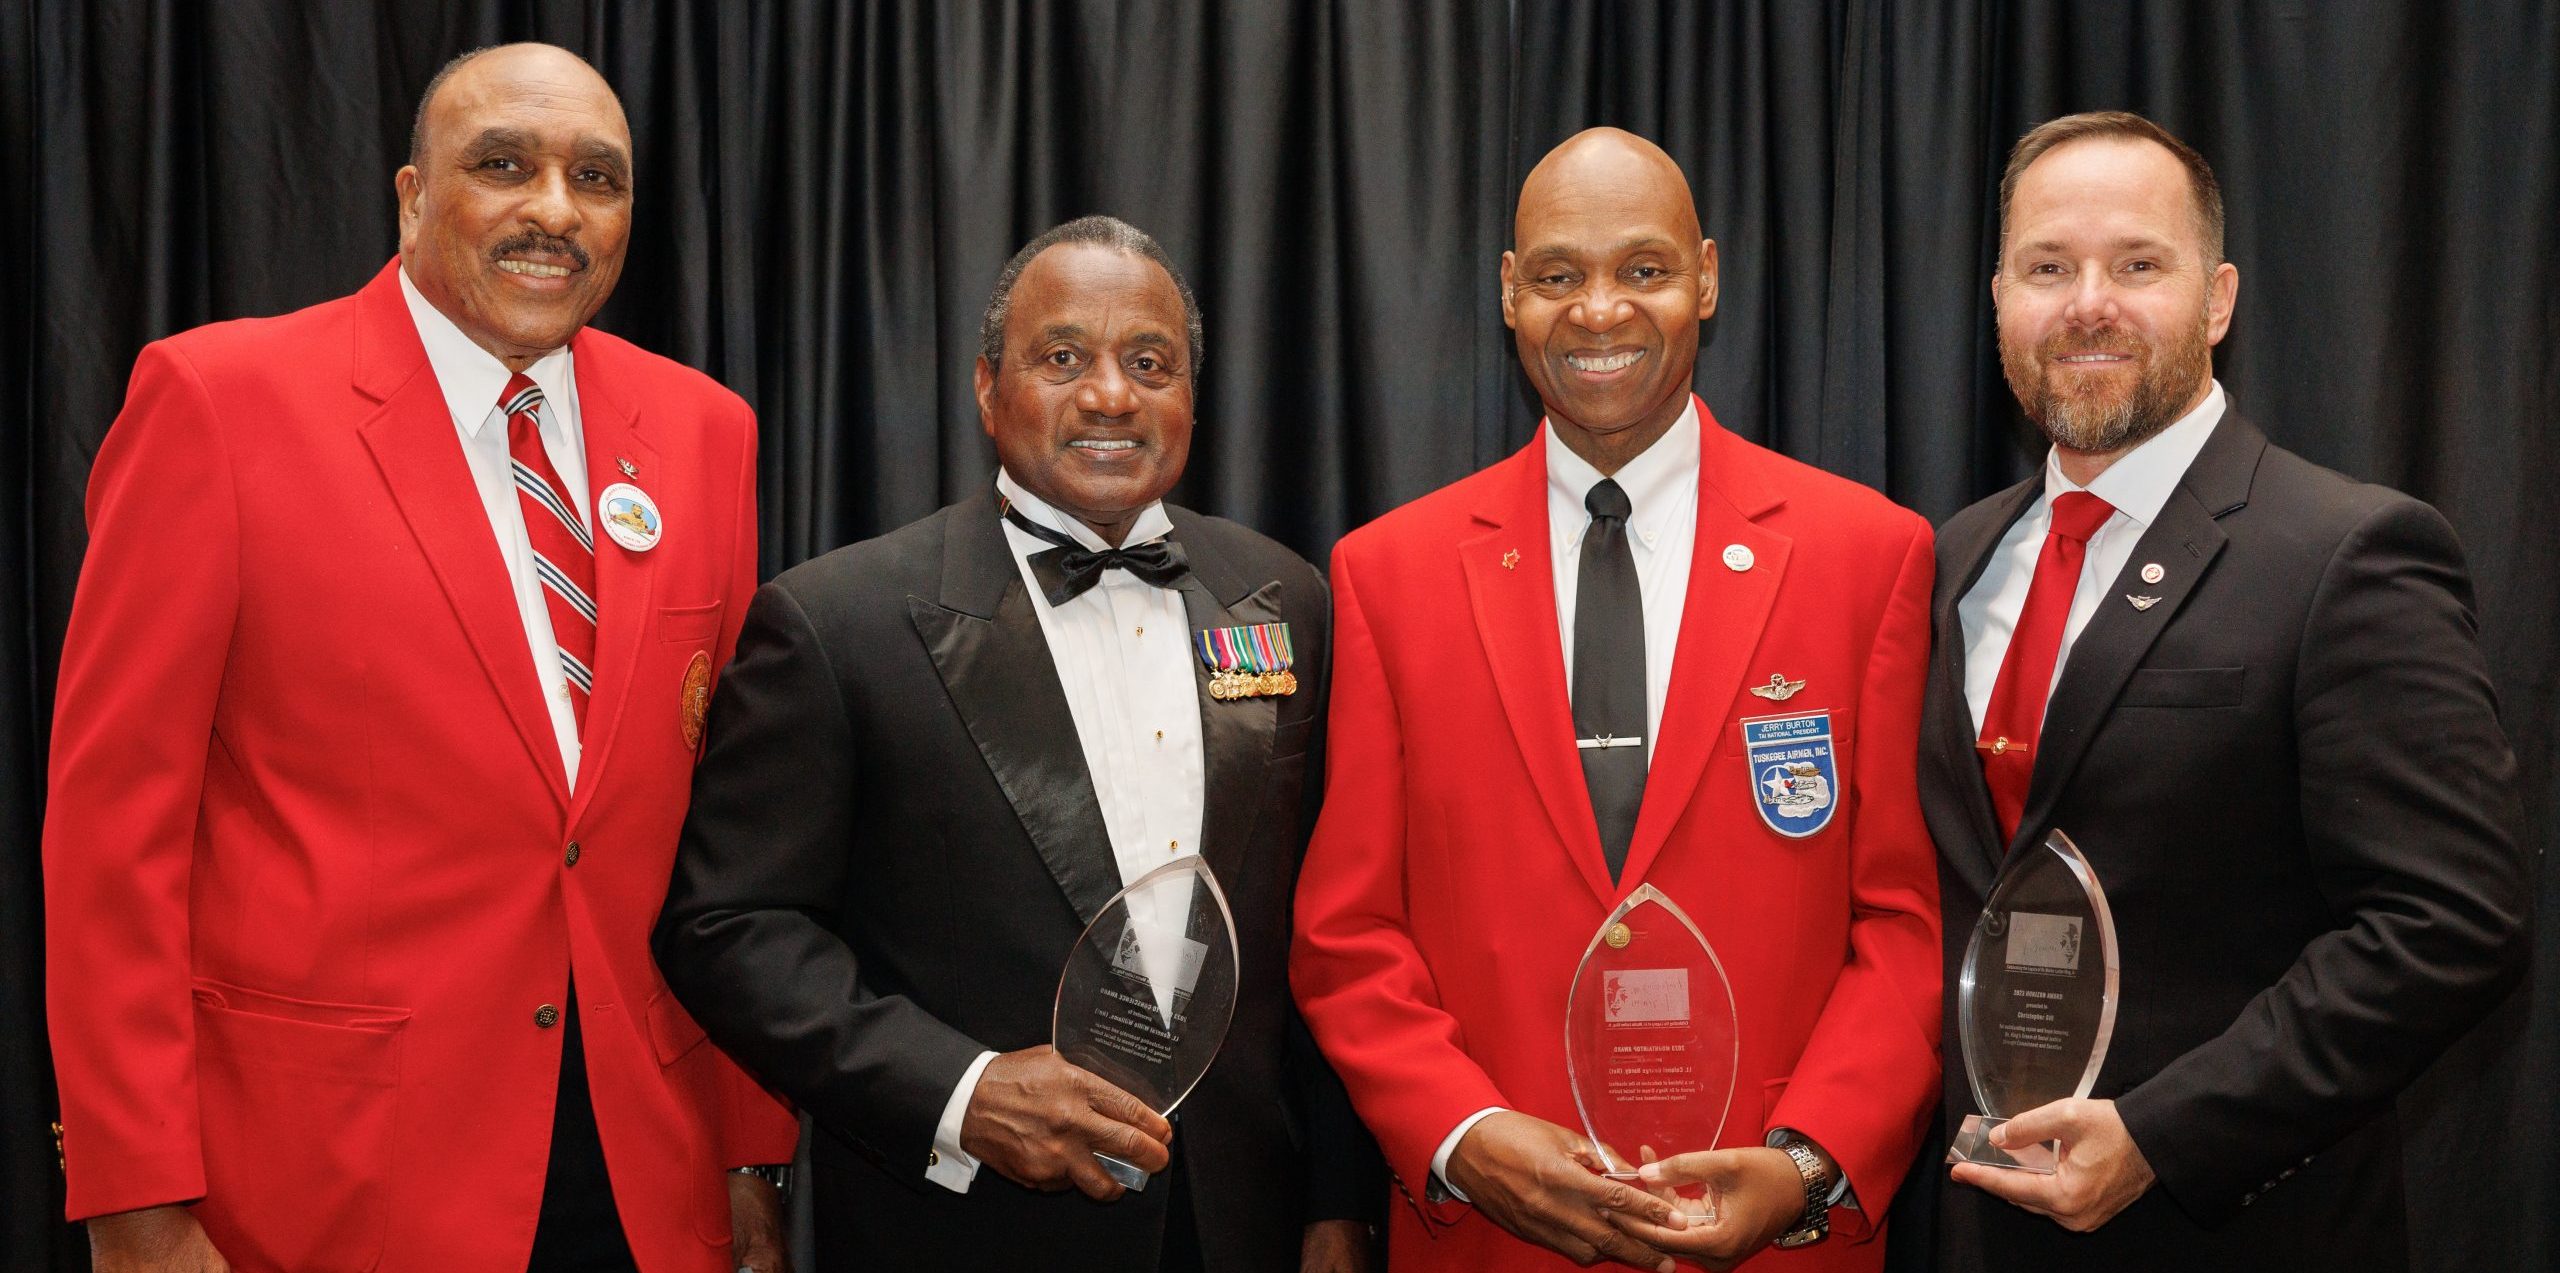 Group of four men standing in line for a picture. Three of them are holding awards in their hands